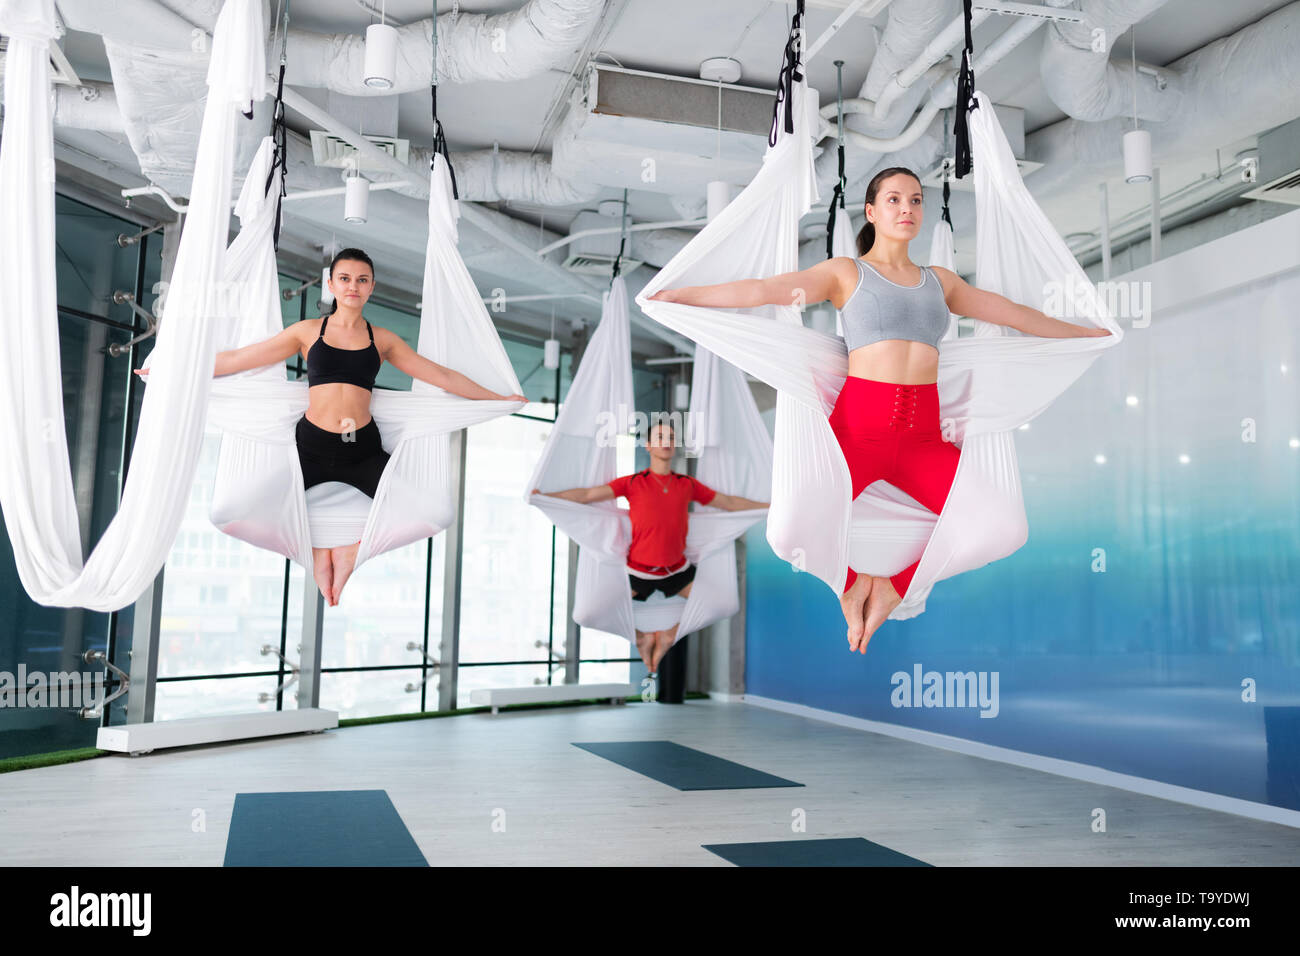 Fit and active man and women attending fly yoga class together Stock Photo